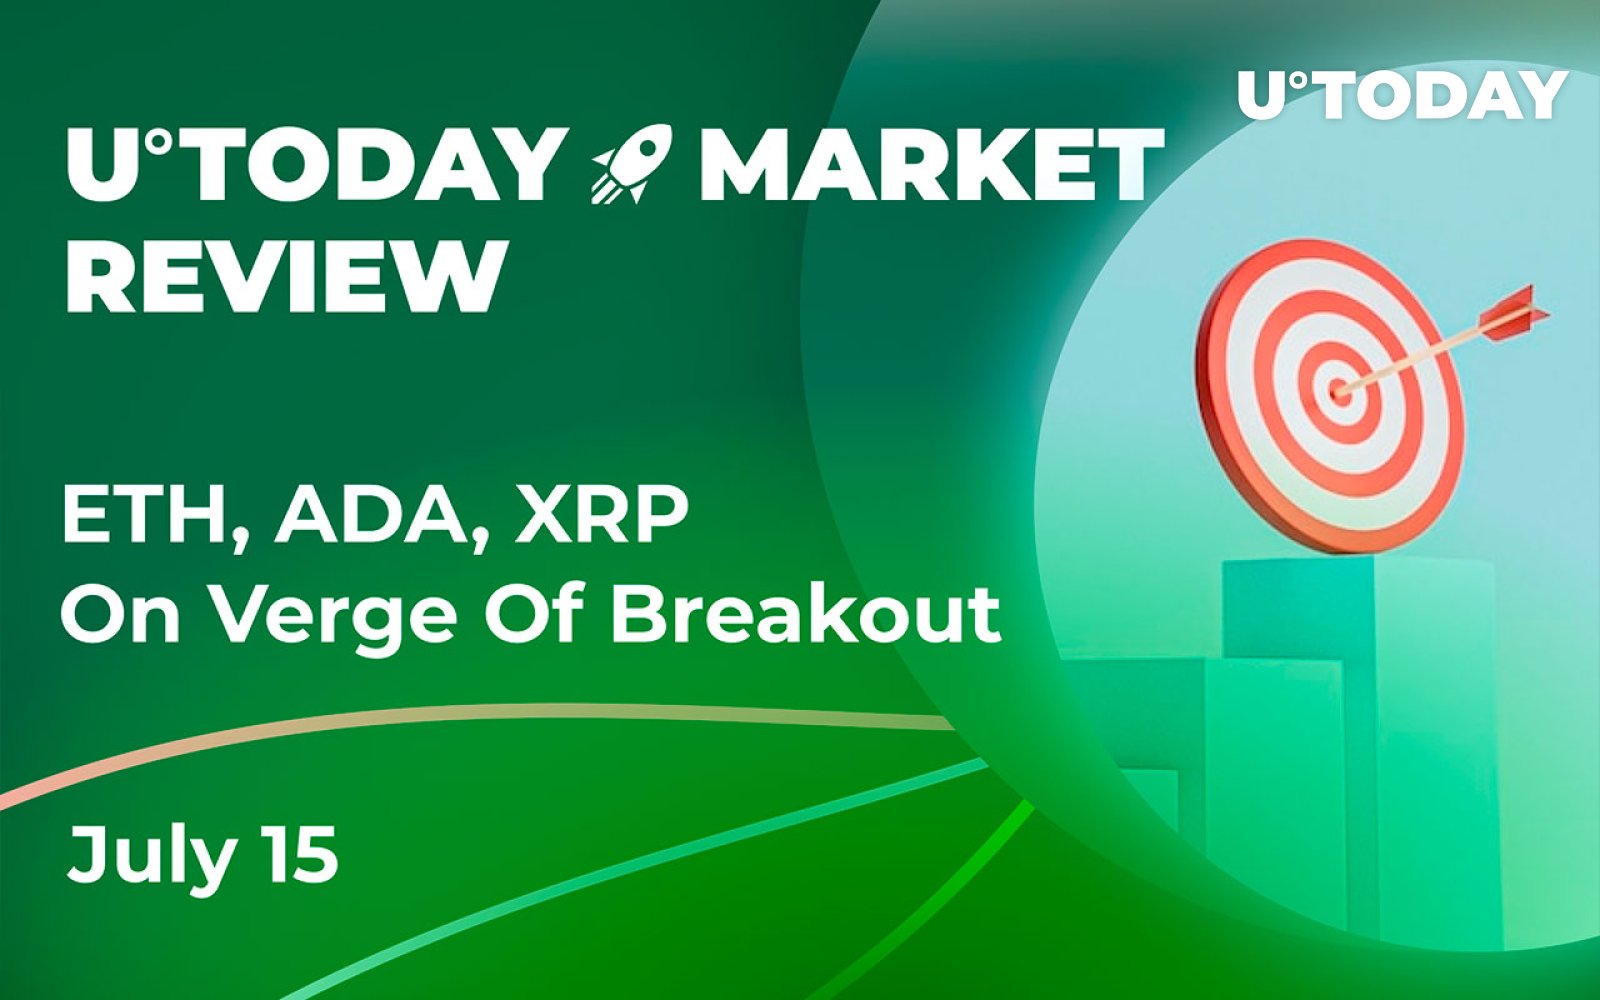 ETH, ADA, XRP on Verge of Breakout After Reaching Essential Resistance Level: Crypto Market Review, July 15